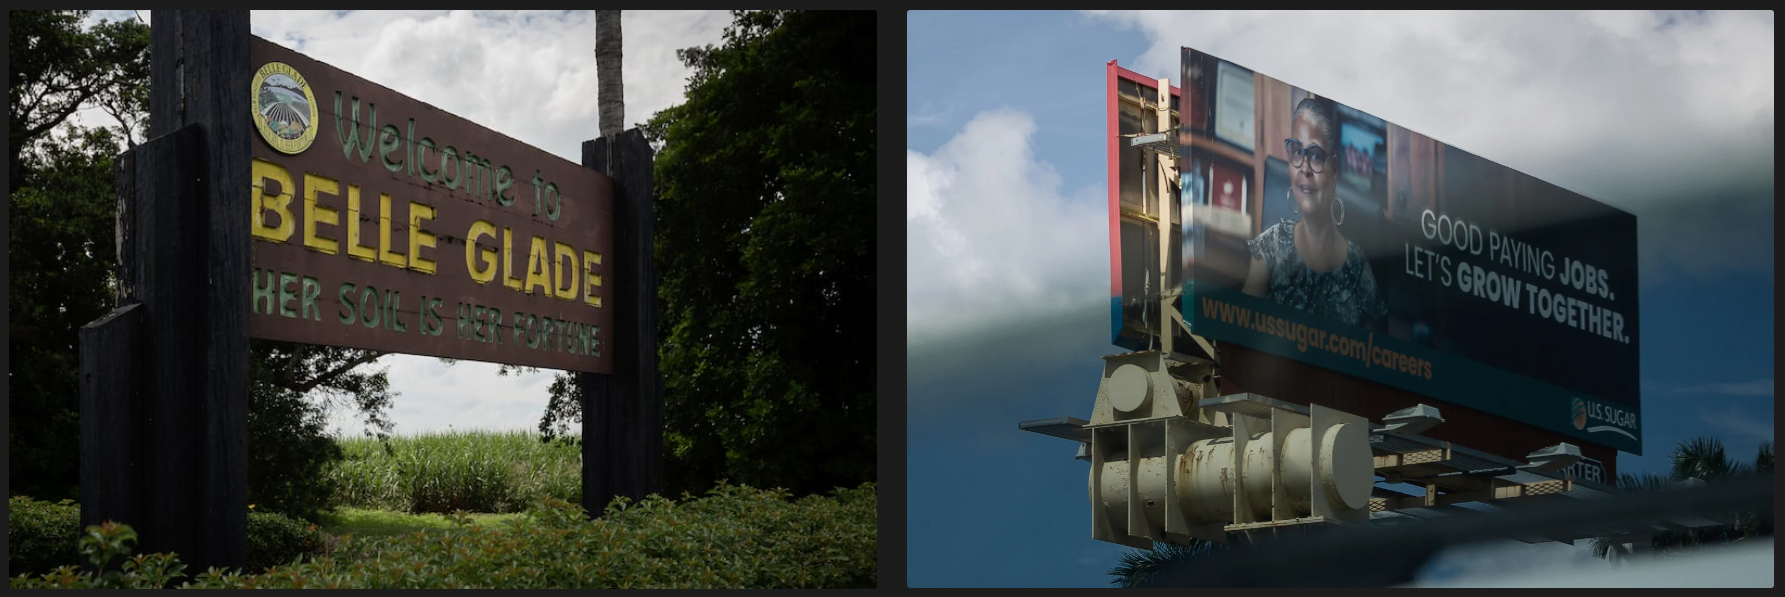 Gallery of two photographs: on the left, a photo of a wooden sign on the side of a road, reading "Welcome to Belle Glade, her soil is her fortune,"; on the right, a photo of a highway billboard advertising job opportunities from U.S. Sugar.